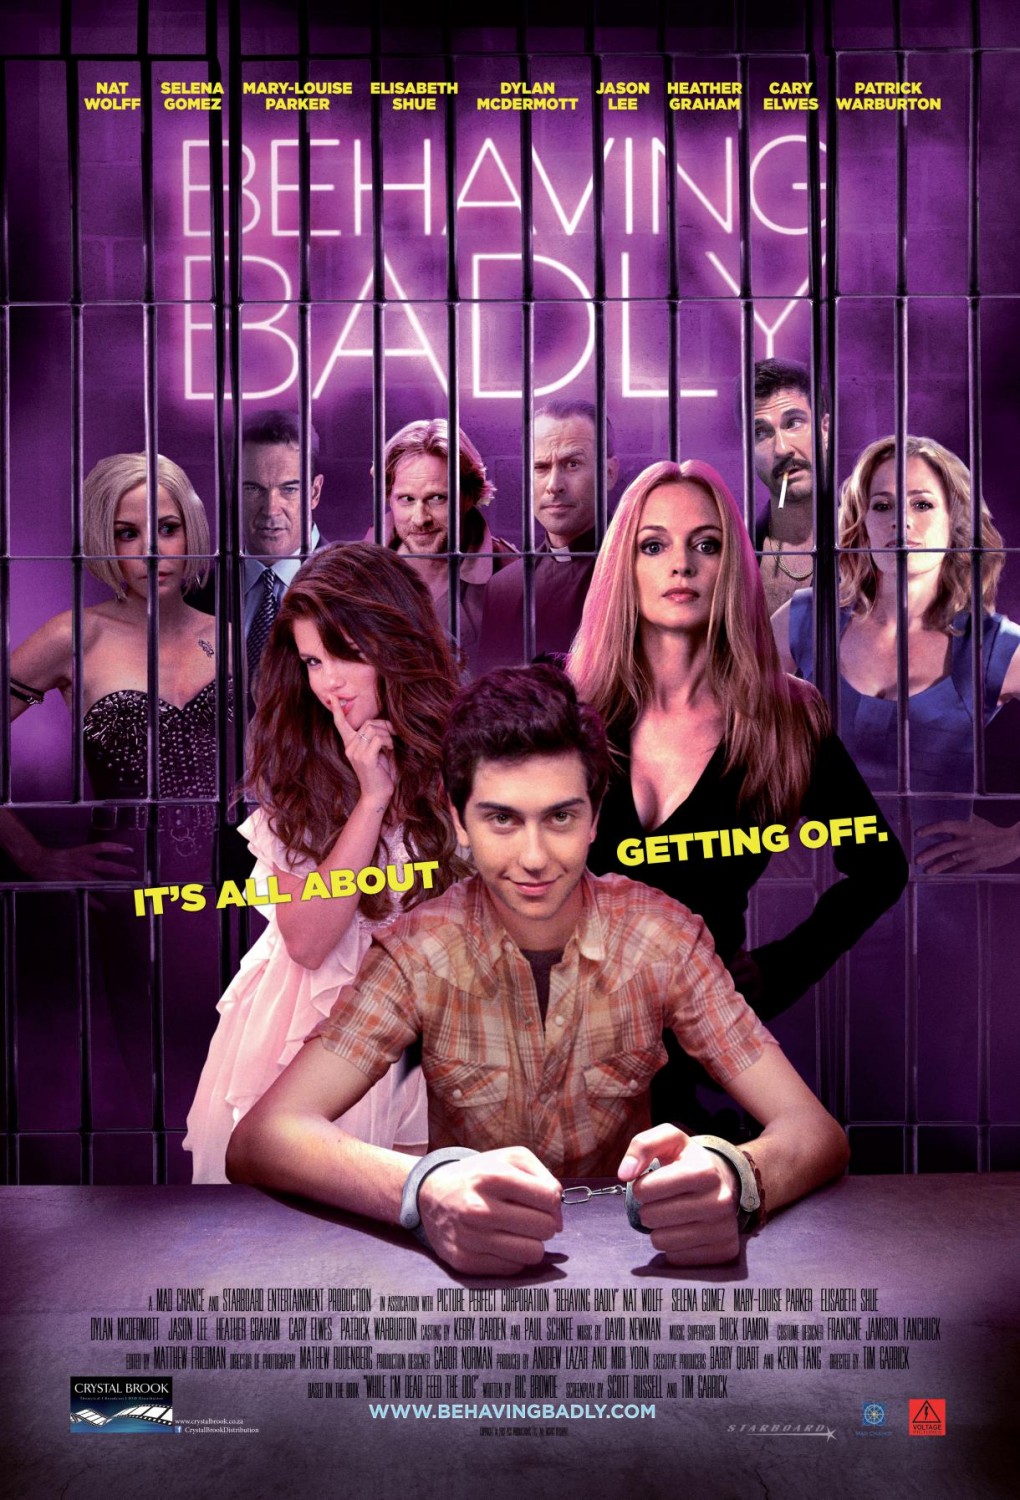 Extra Large Movie Poster Image for Behaving Badly (#1 of 2)